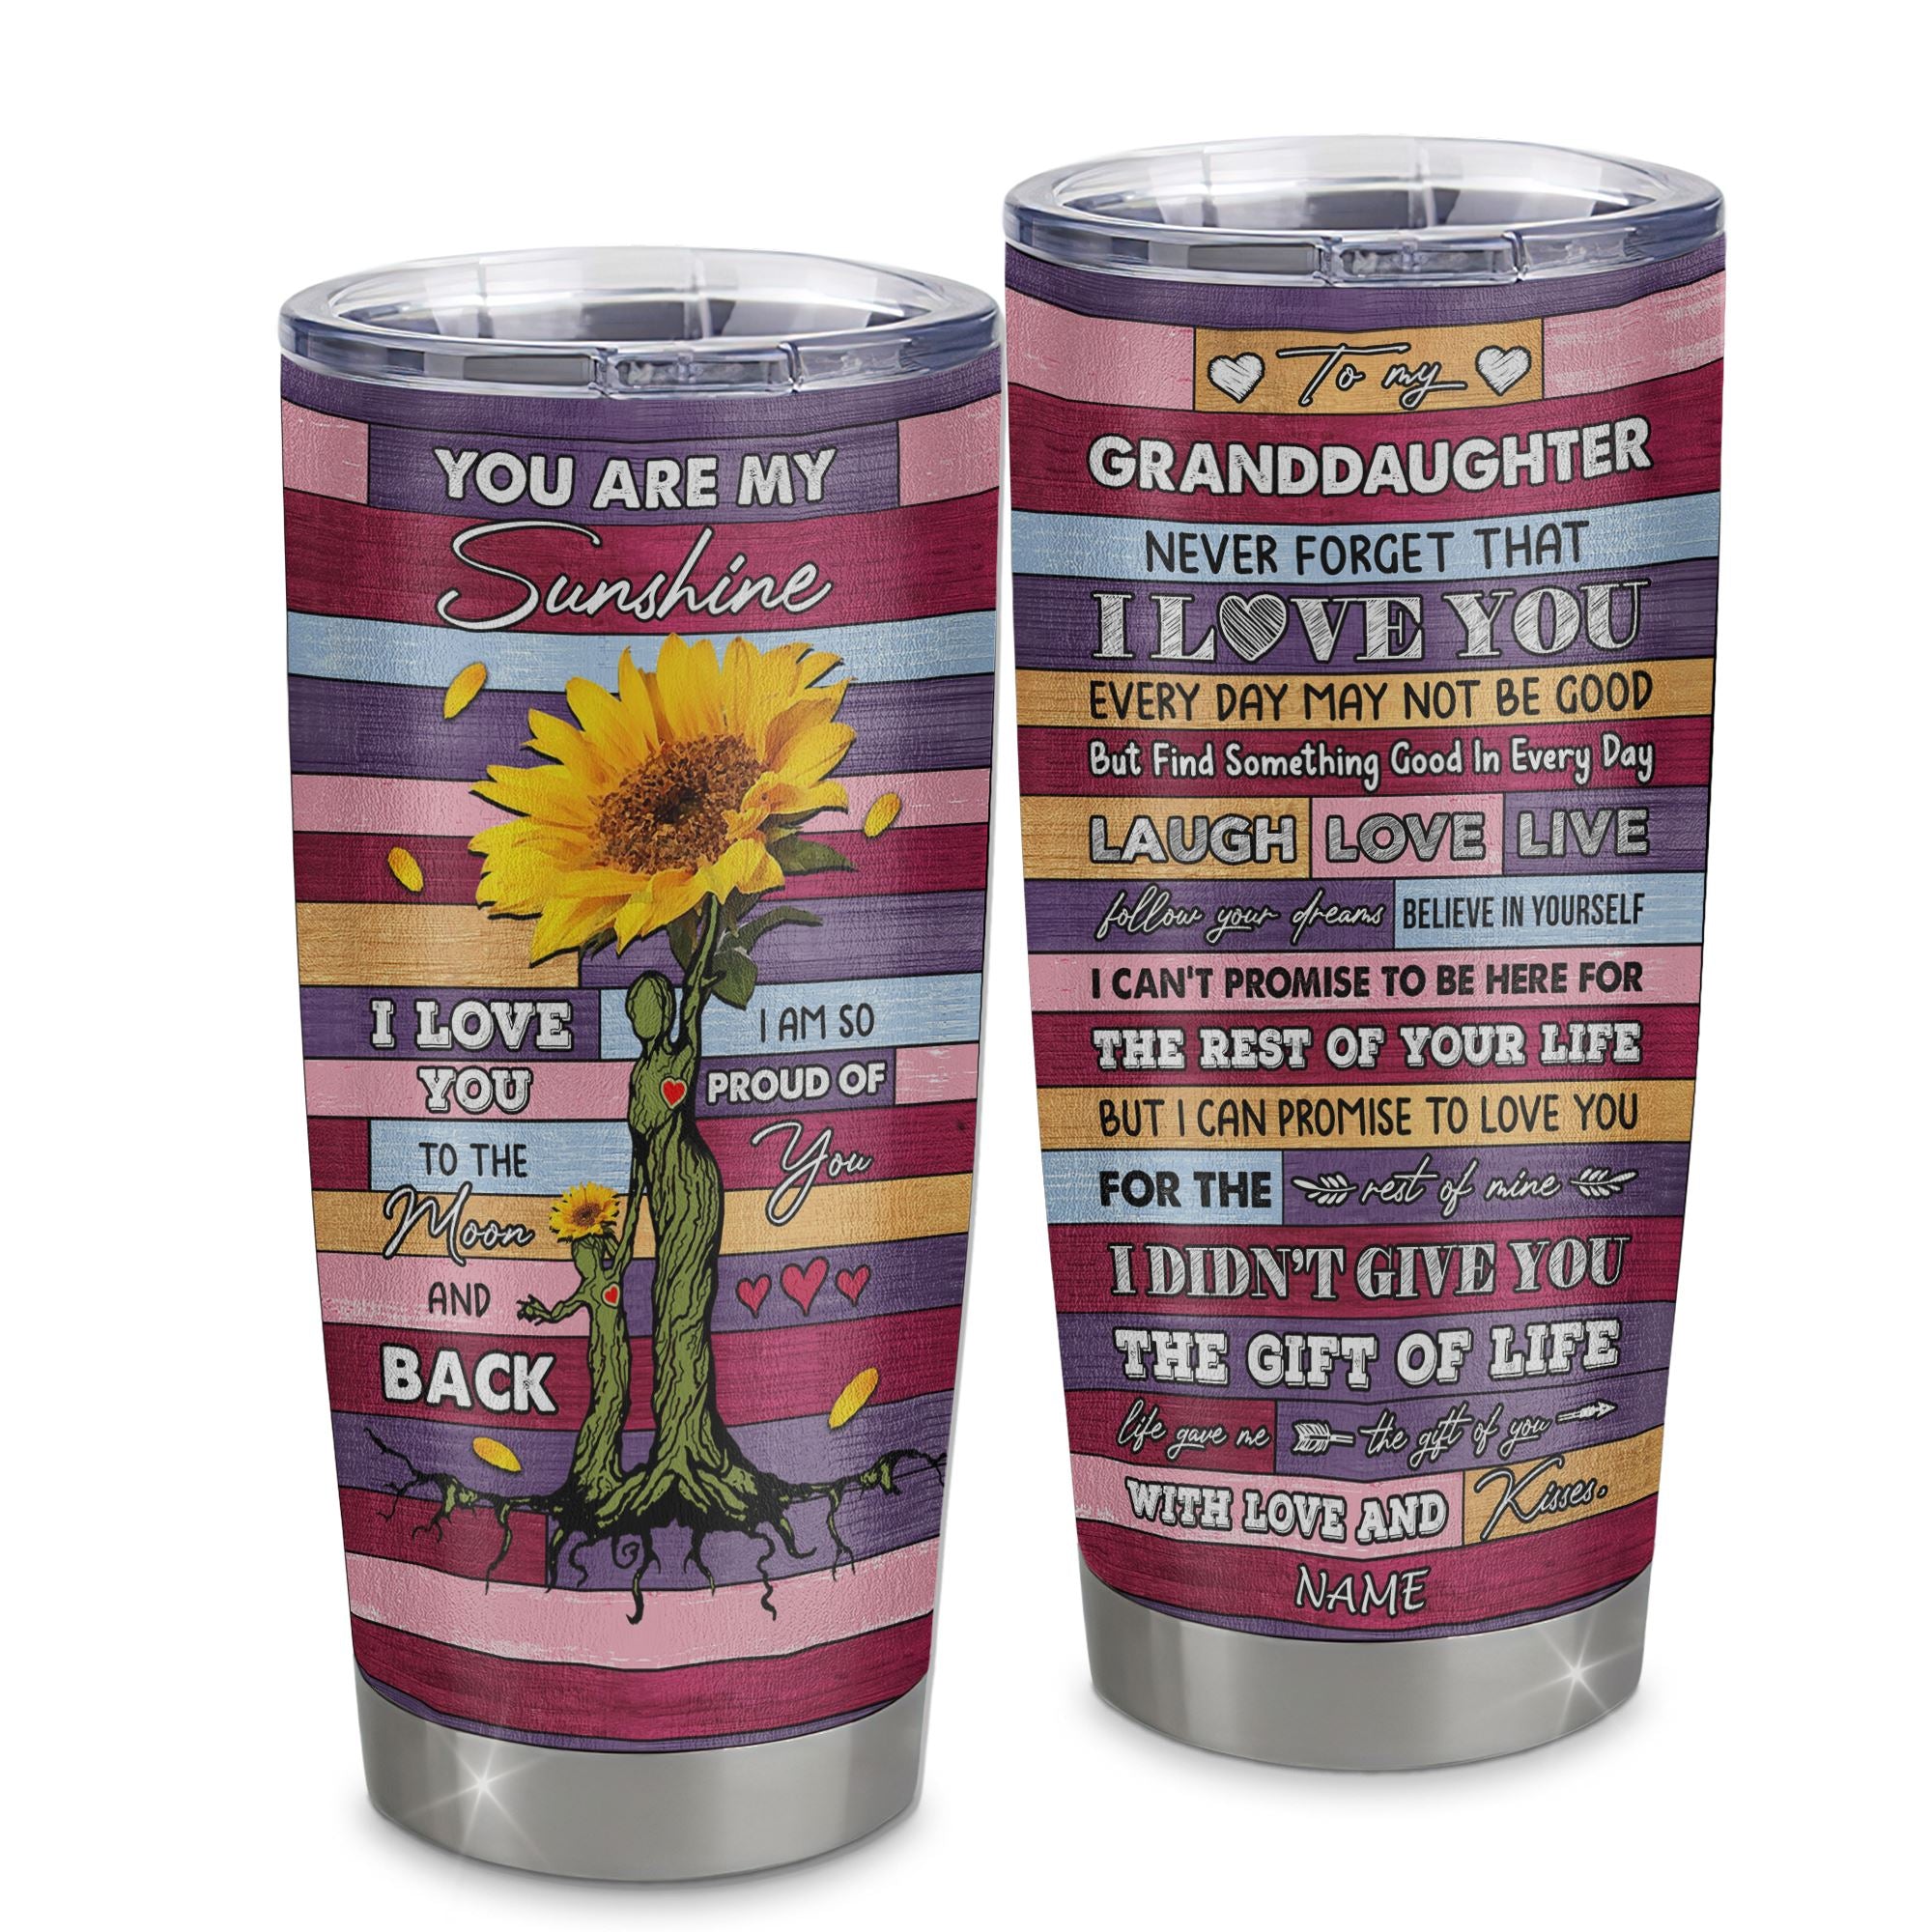 Personalized_To_My_Granddaughter_From_Grandma_Stainless_Steel_Tumbler_Cup_Wood_Sunflower_Never_Forget_I_Love_You_Granddaughter_Birthday_Graduation_Christmas_Travel_Mug_Tumbler_mockup-1.jpg